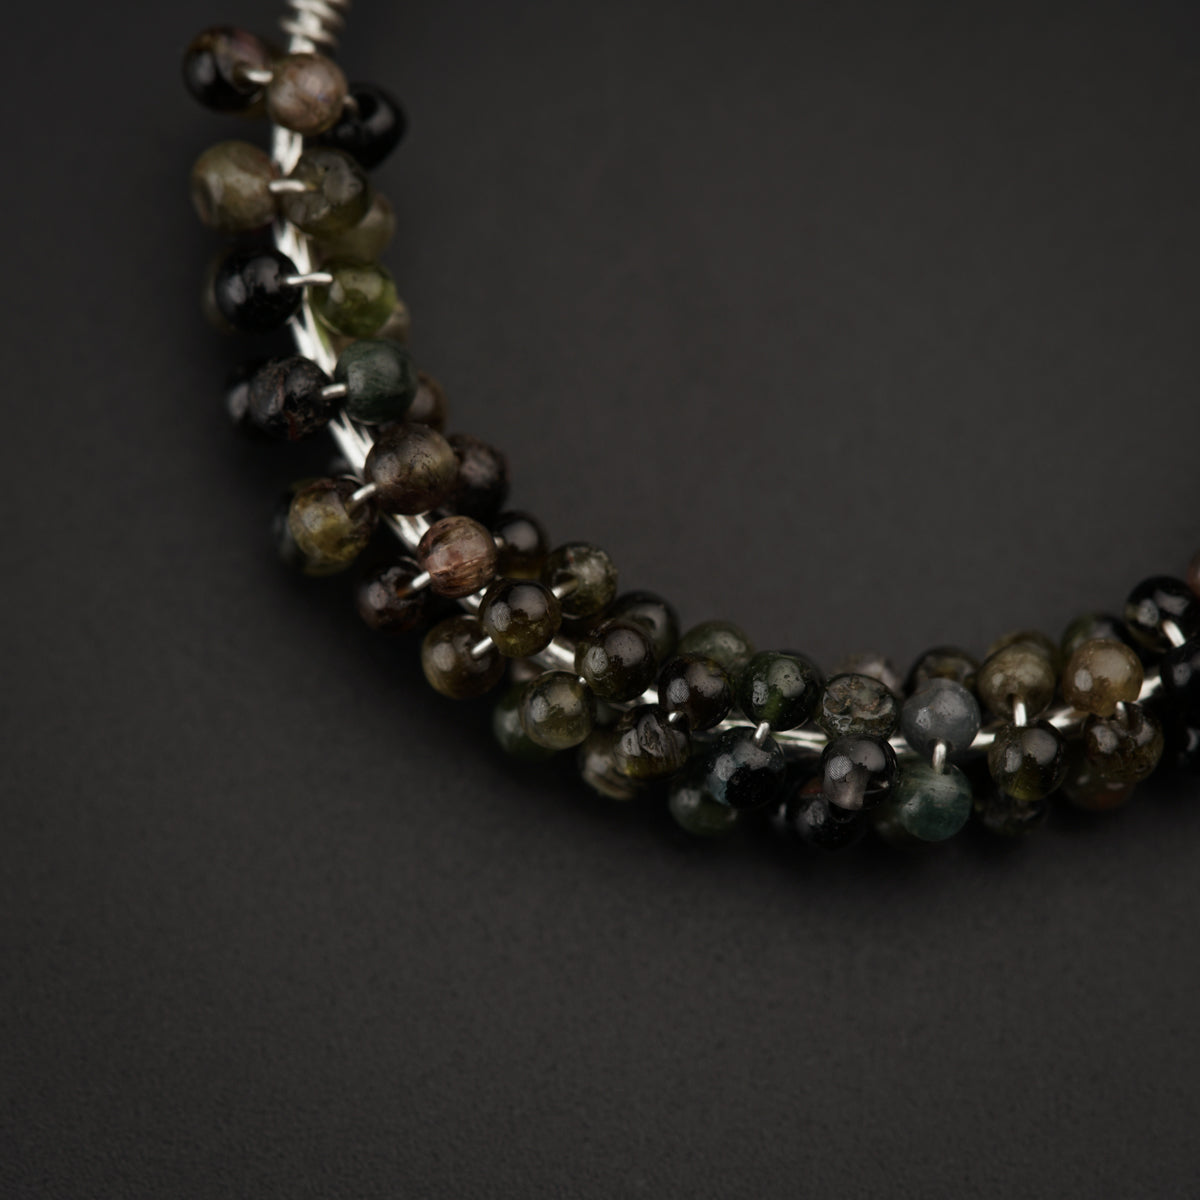 a close up of a beaded necklace on a black surface